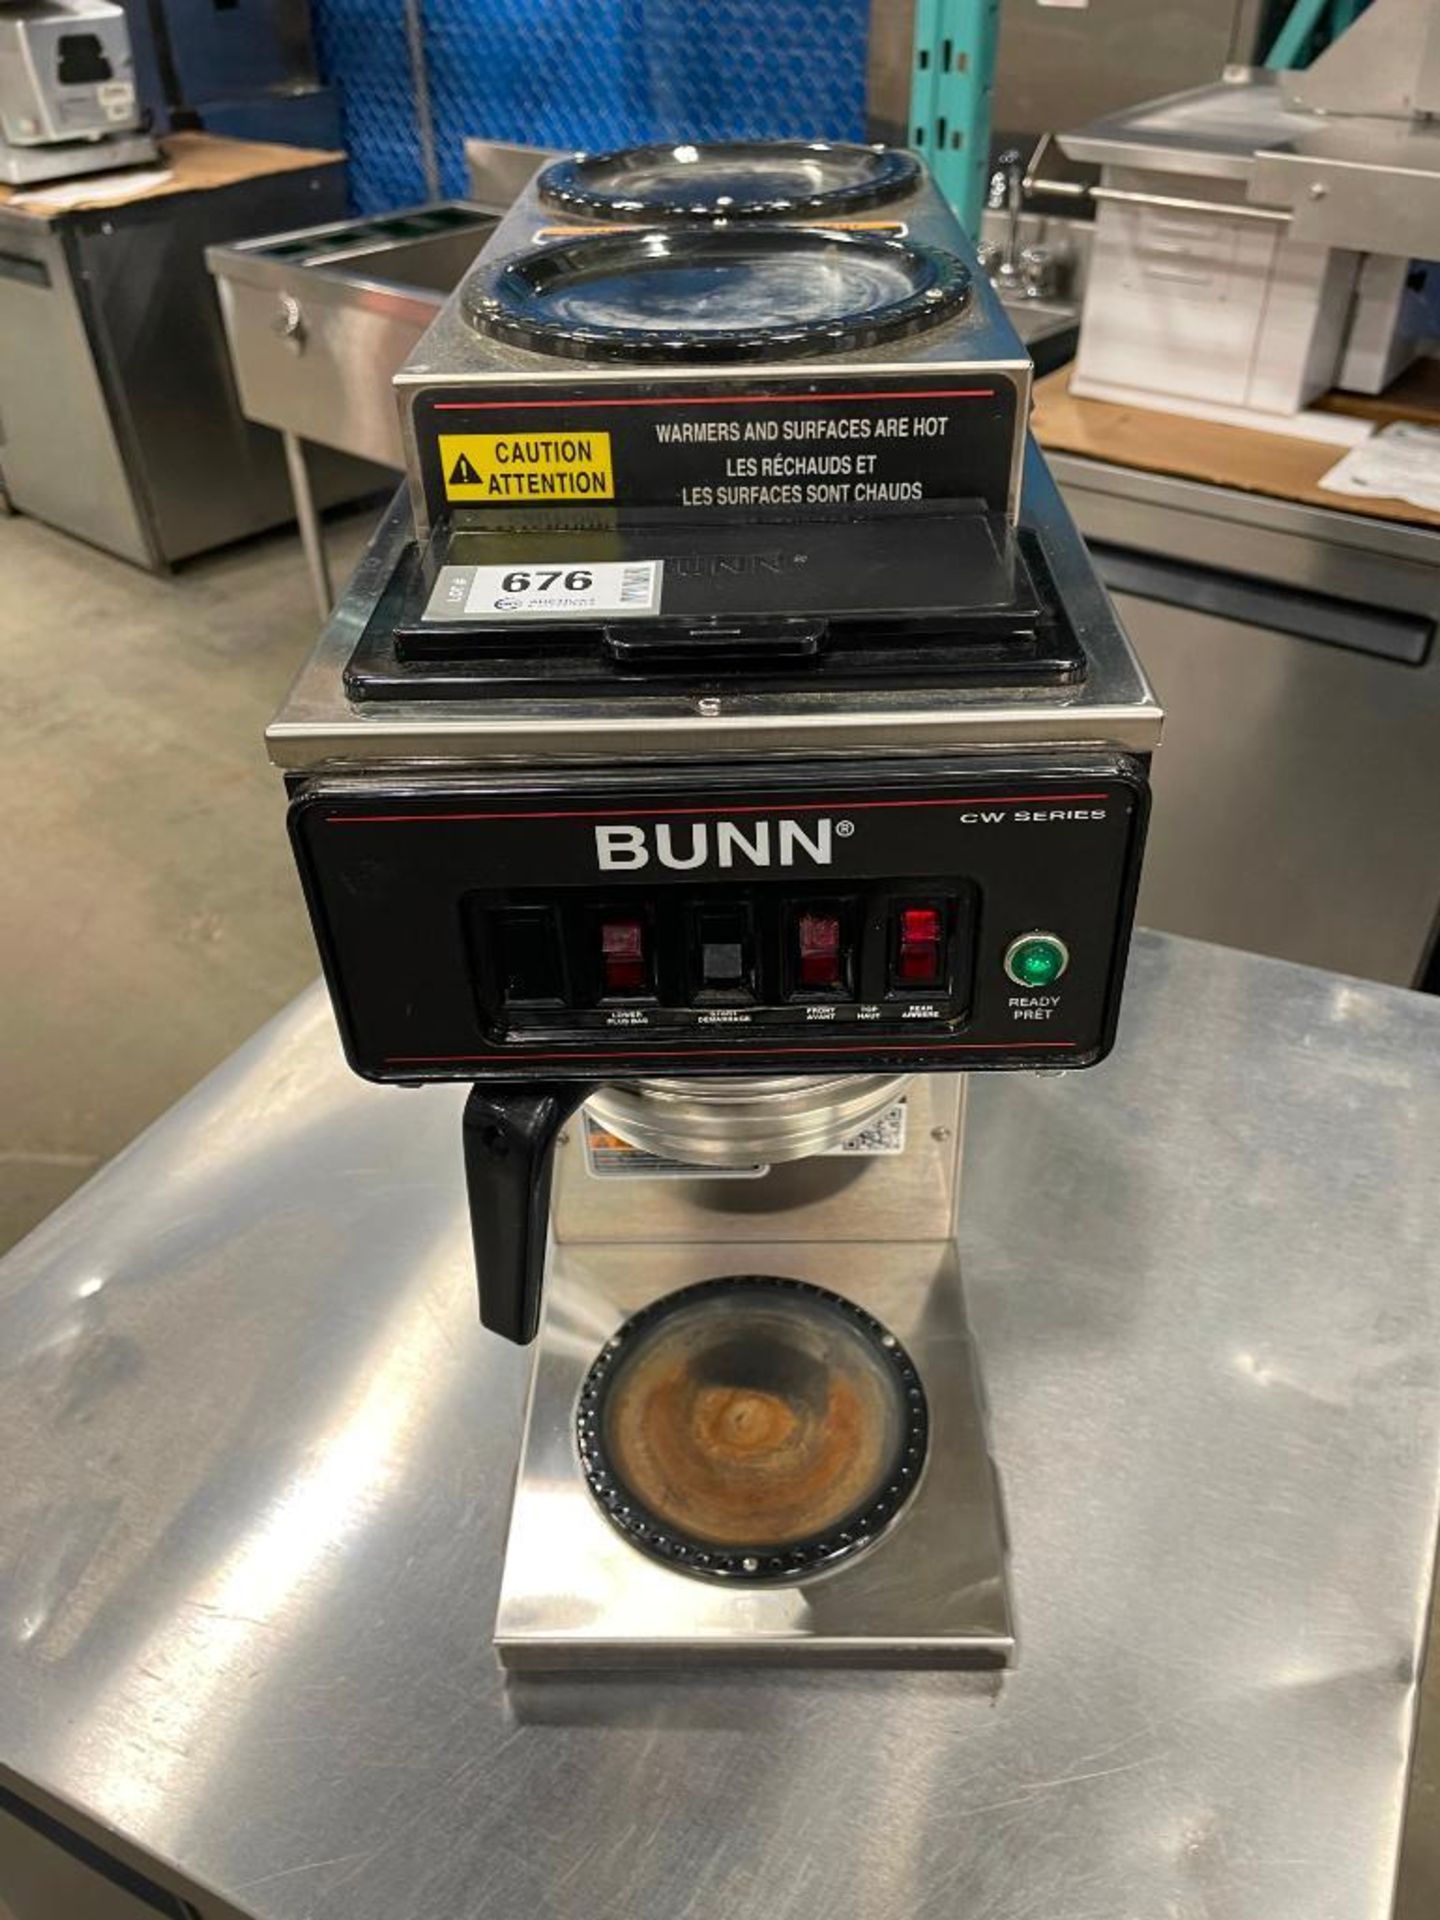 BUNN CWT-35-3T 12 CUP AUTOMATIC COFFEE BREWER WITH 3 WARMERS - Image 2 of 7